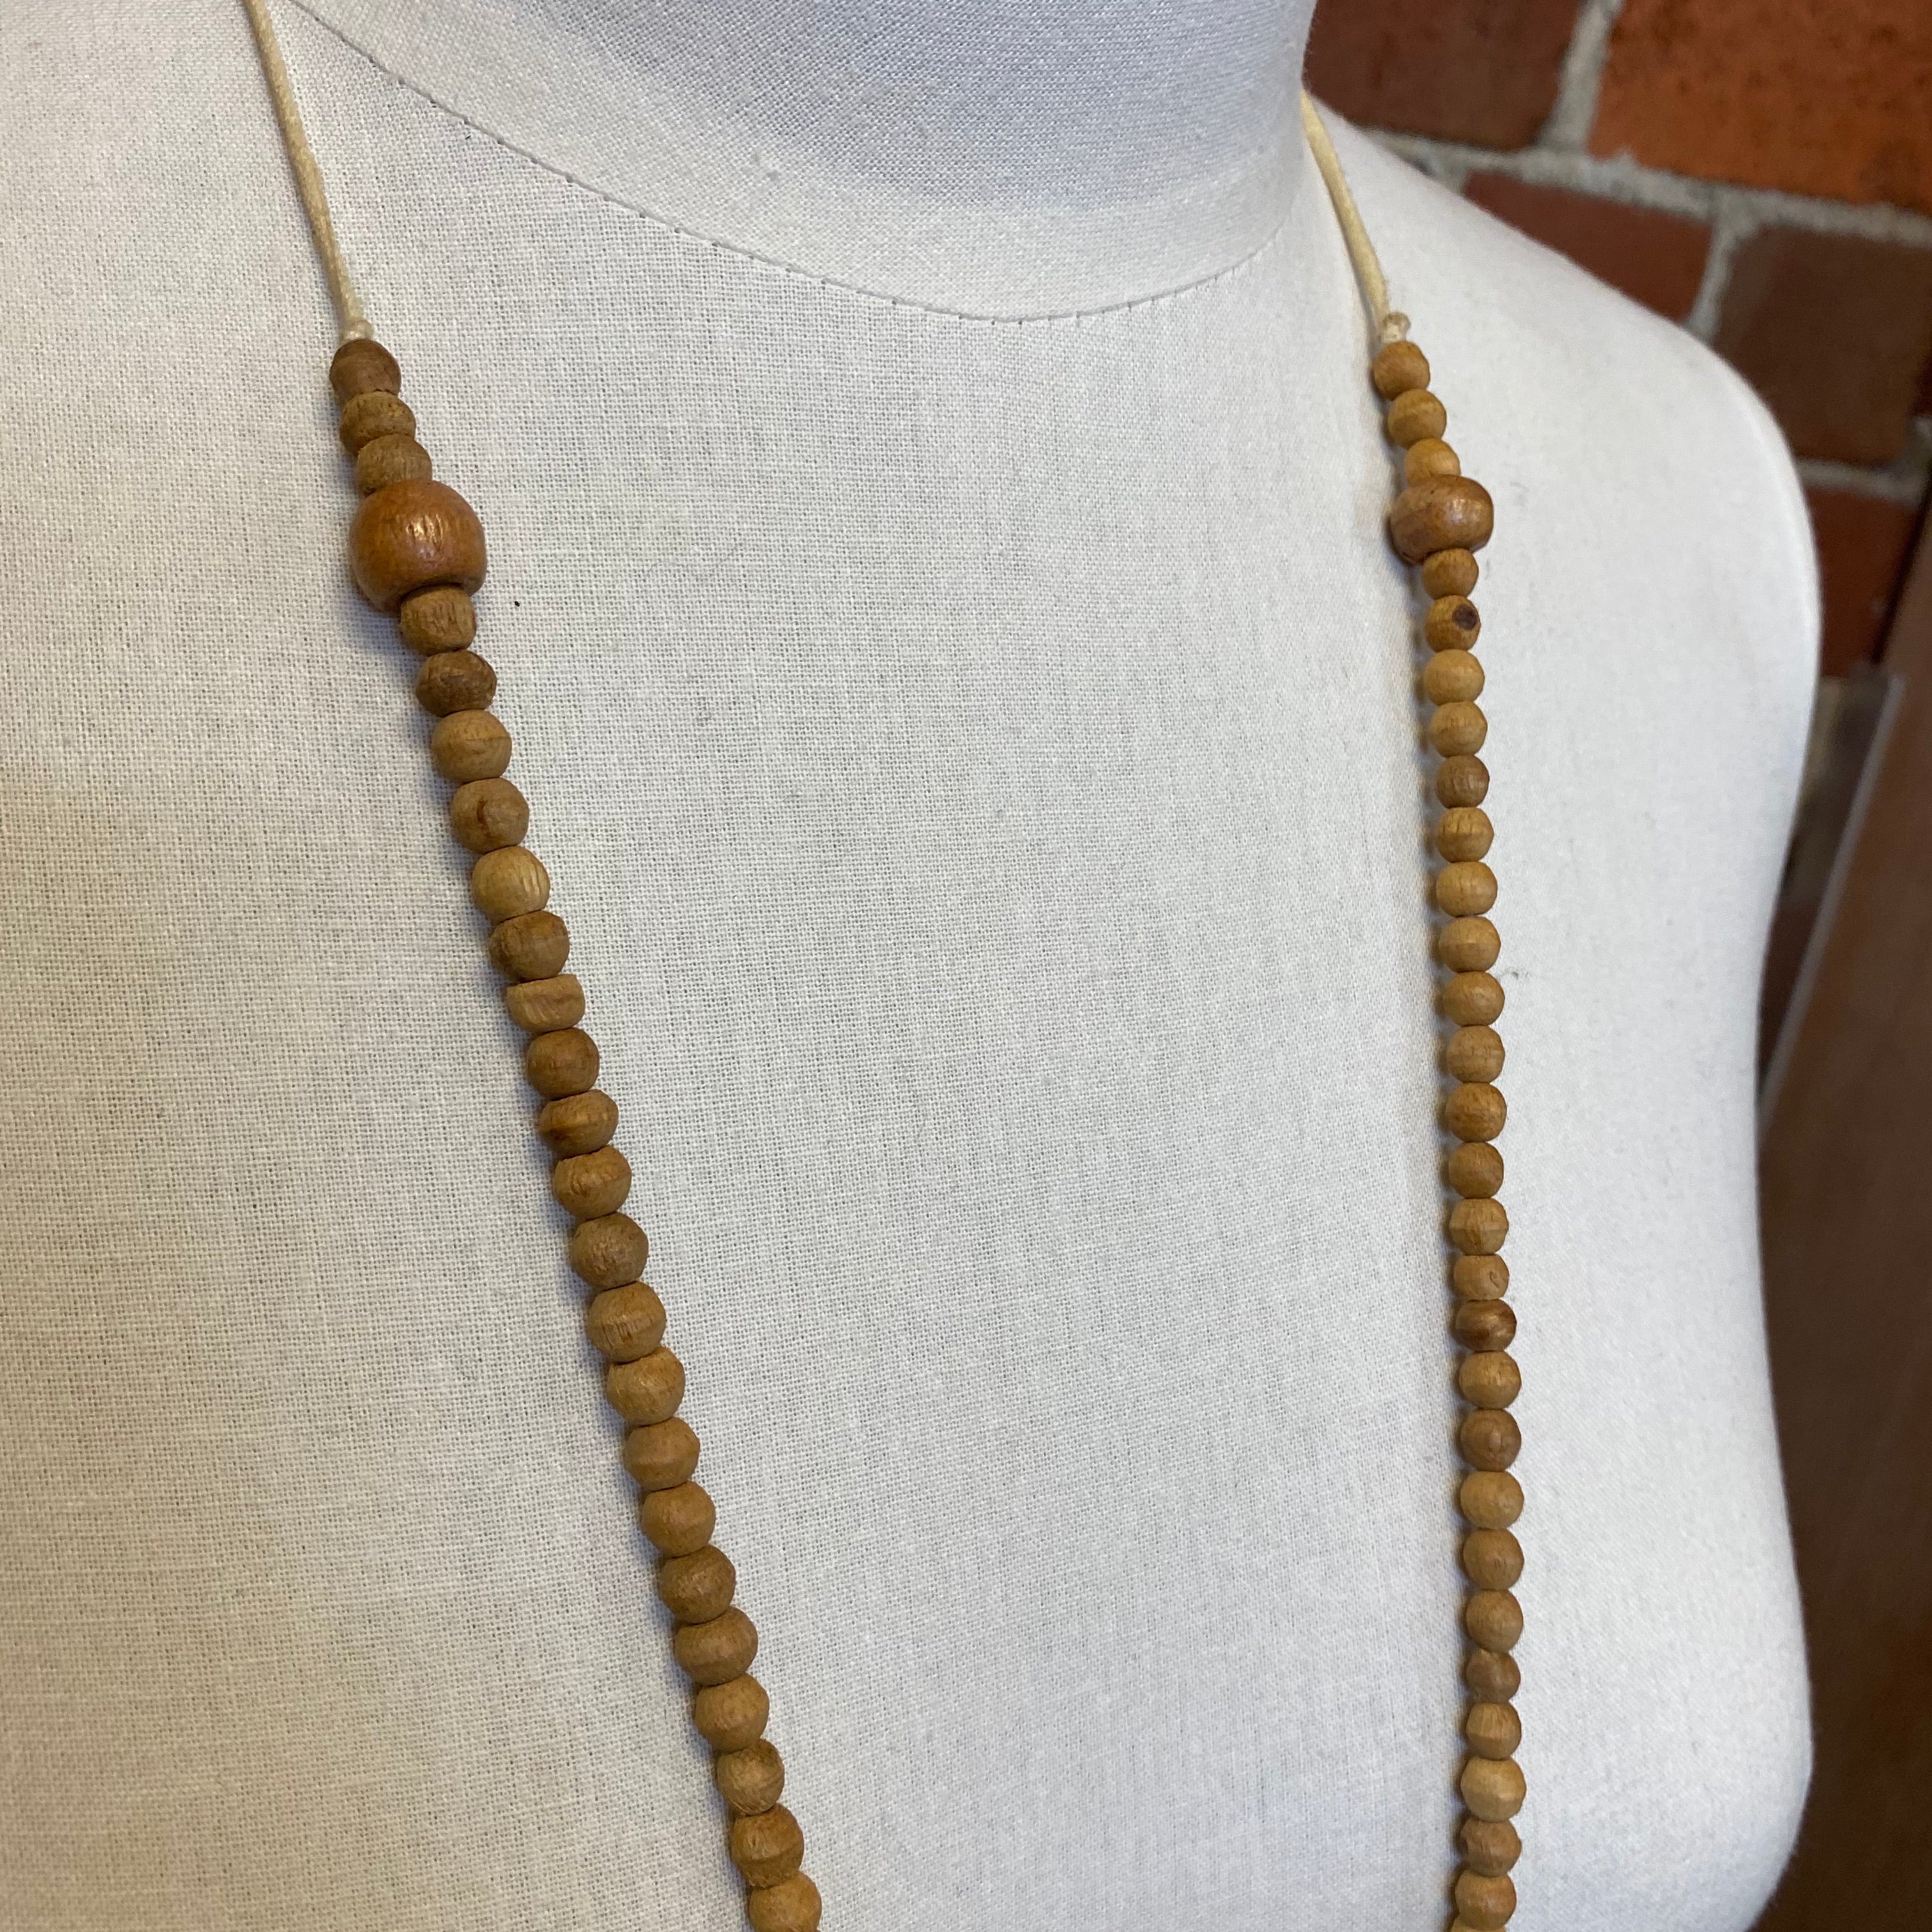 Handmade wooden beads and metal disk necklace